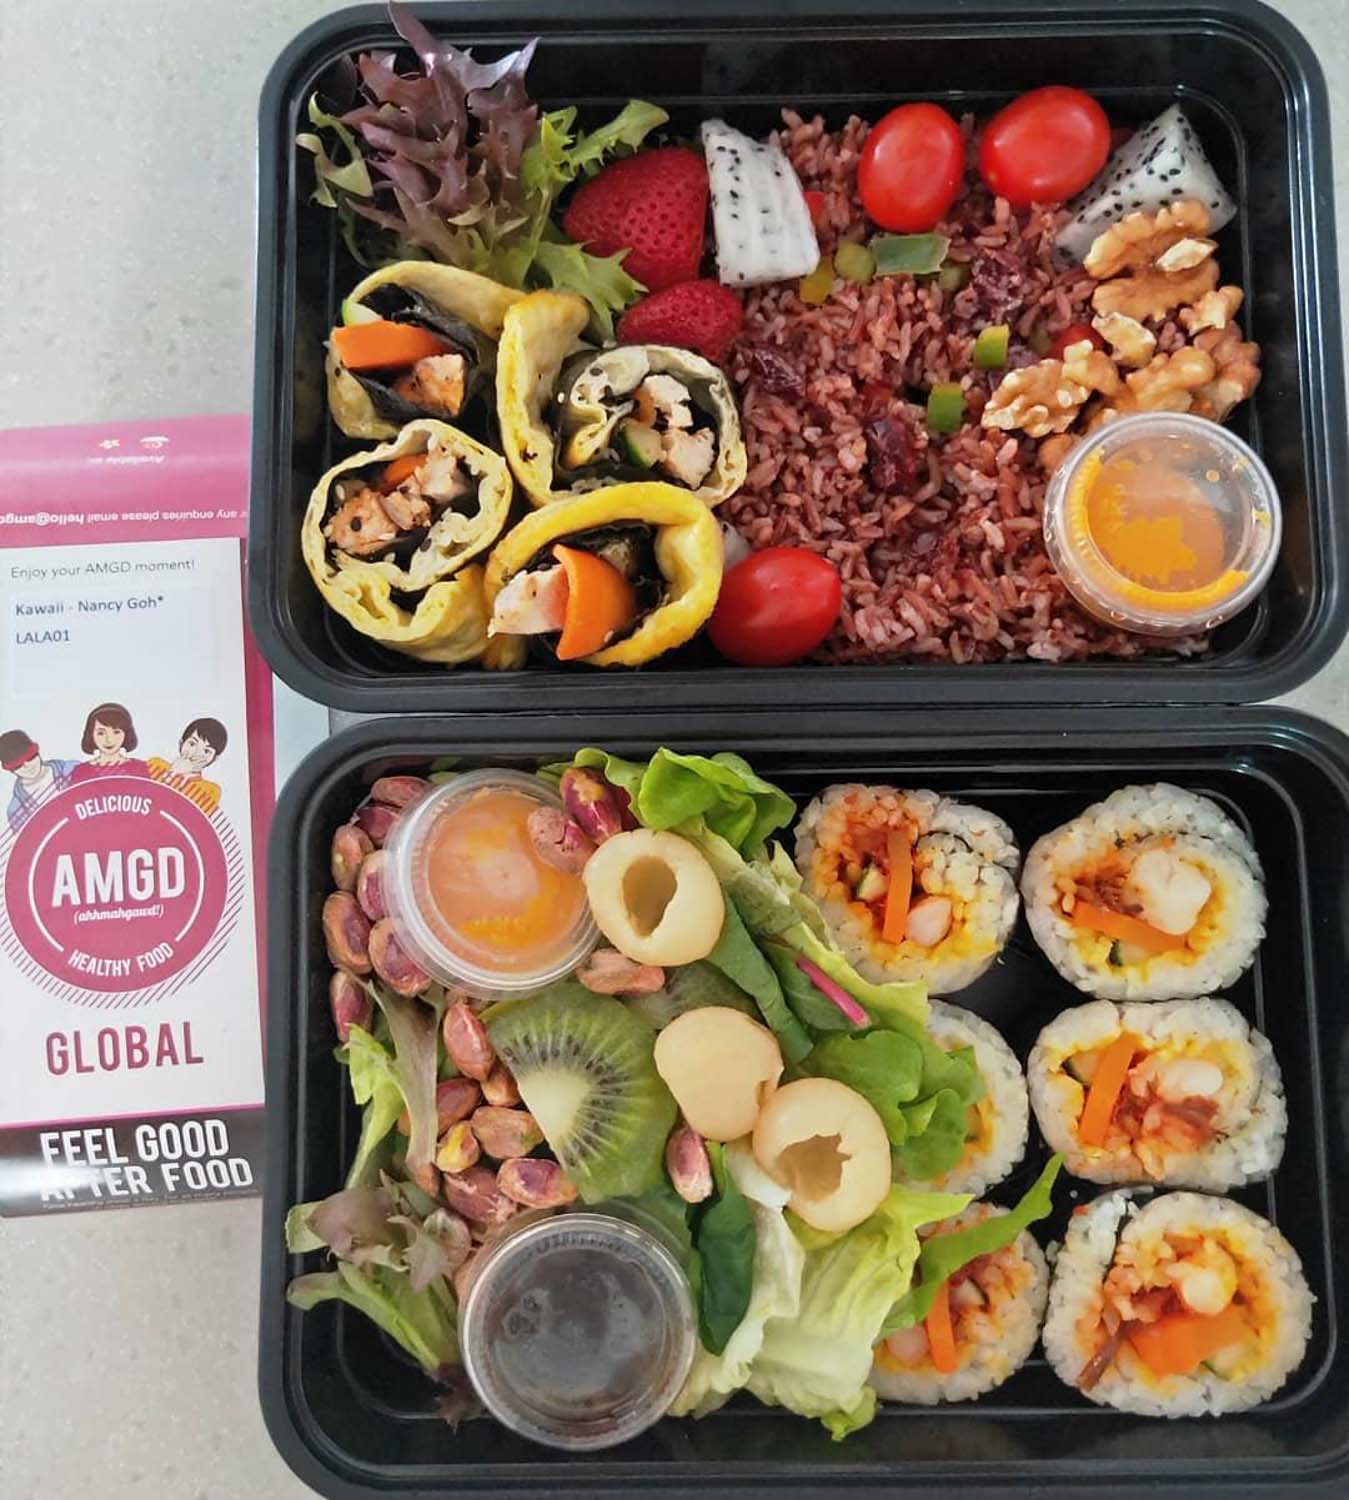 Food Delivery - AMGD